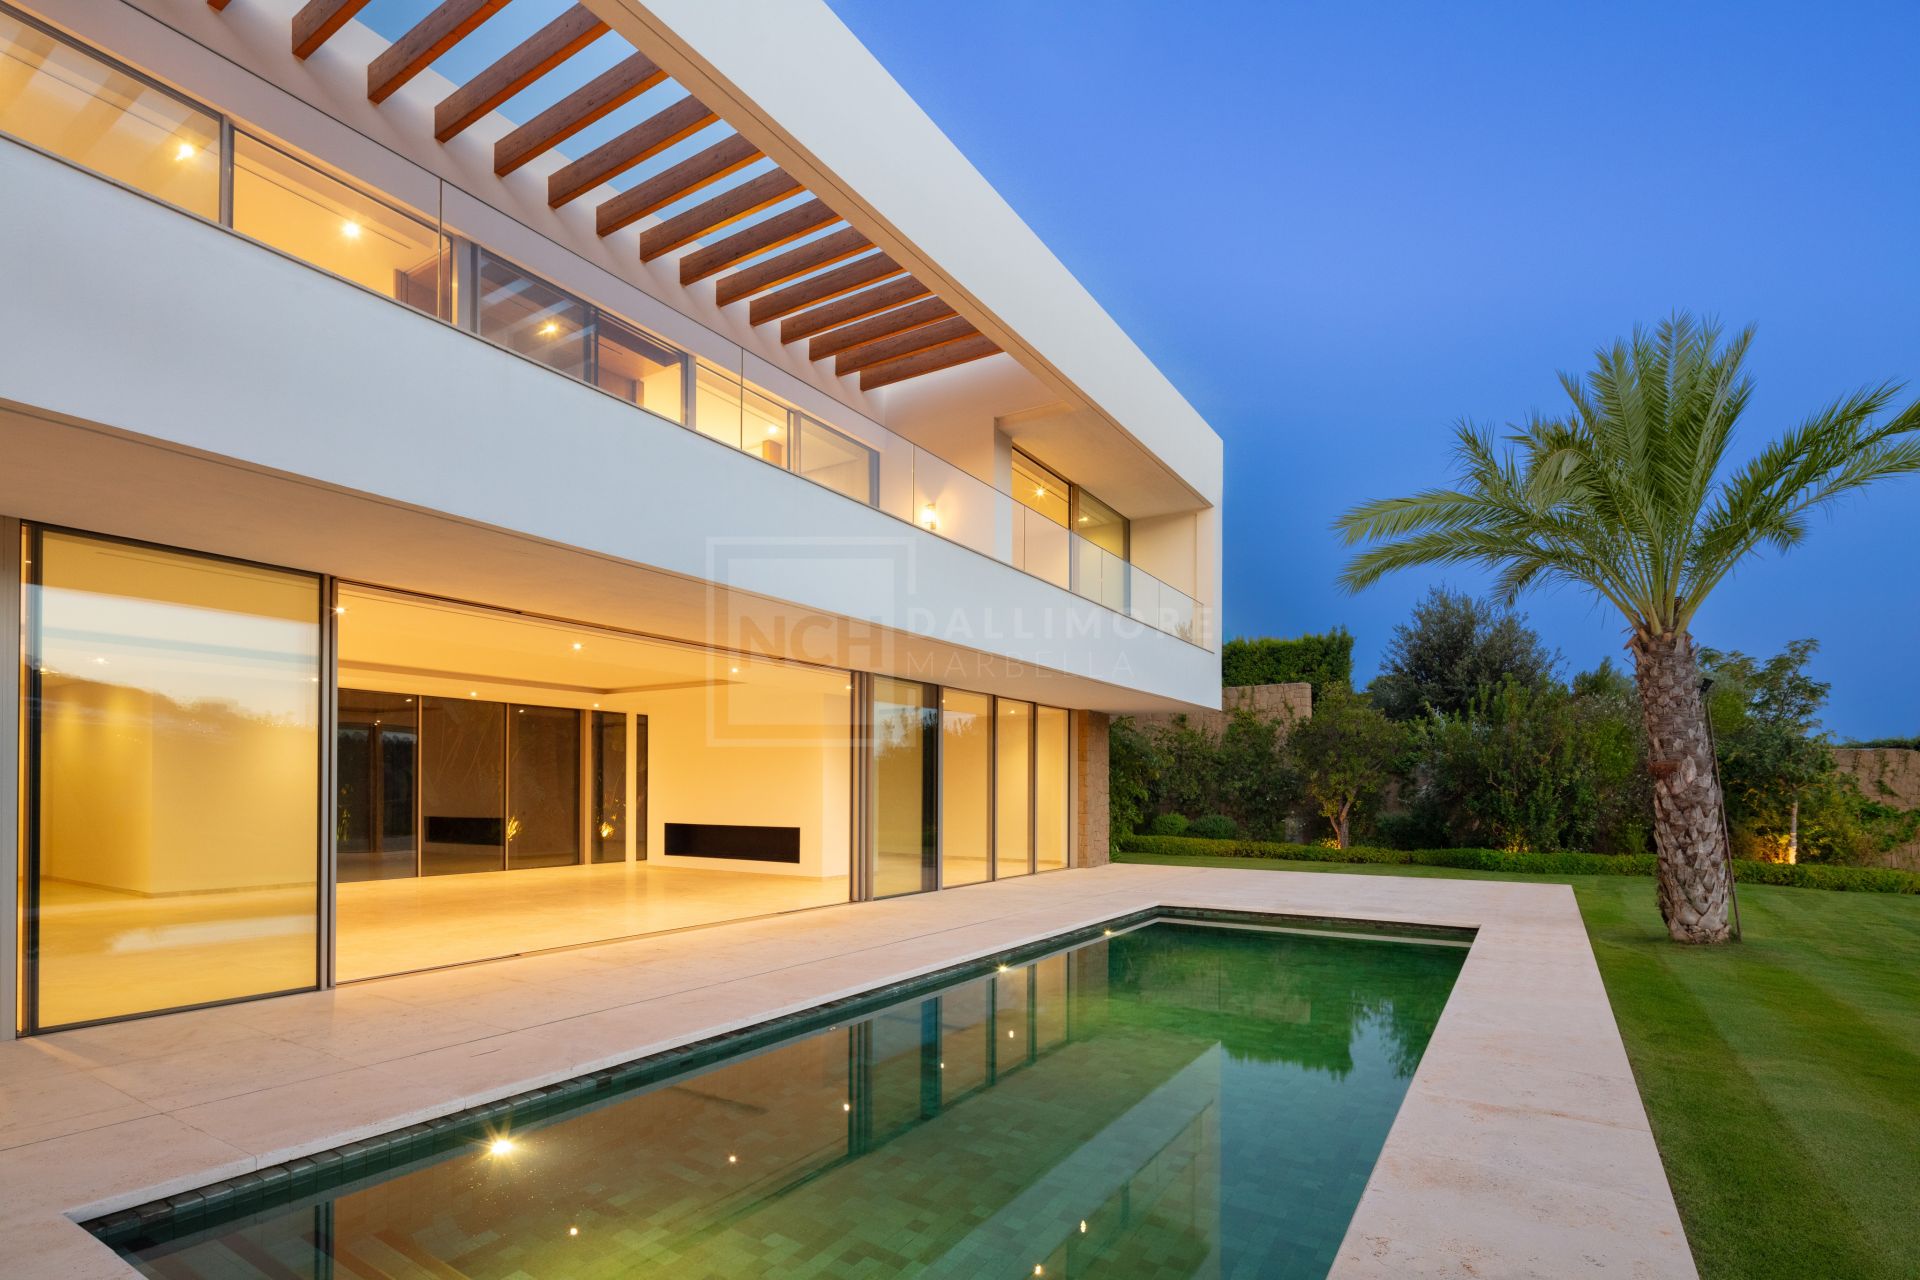 UNIQUE FRONT-LINE GOLF MANSION LOACTED IN FINCA CORTESIN